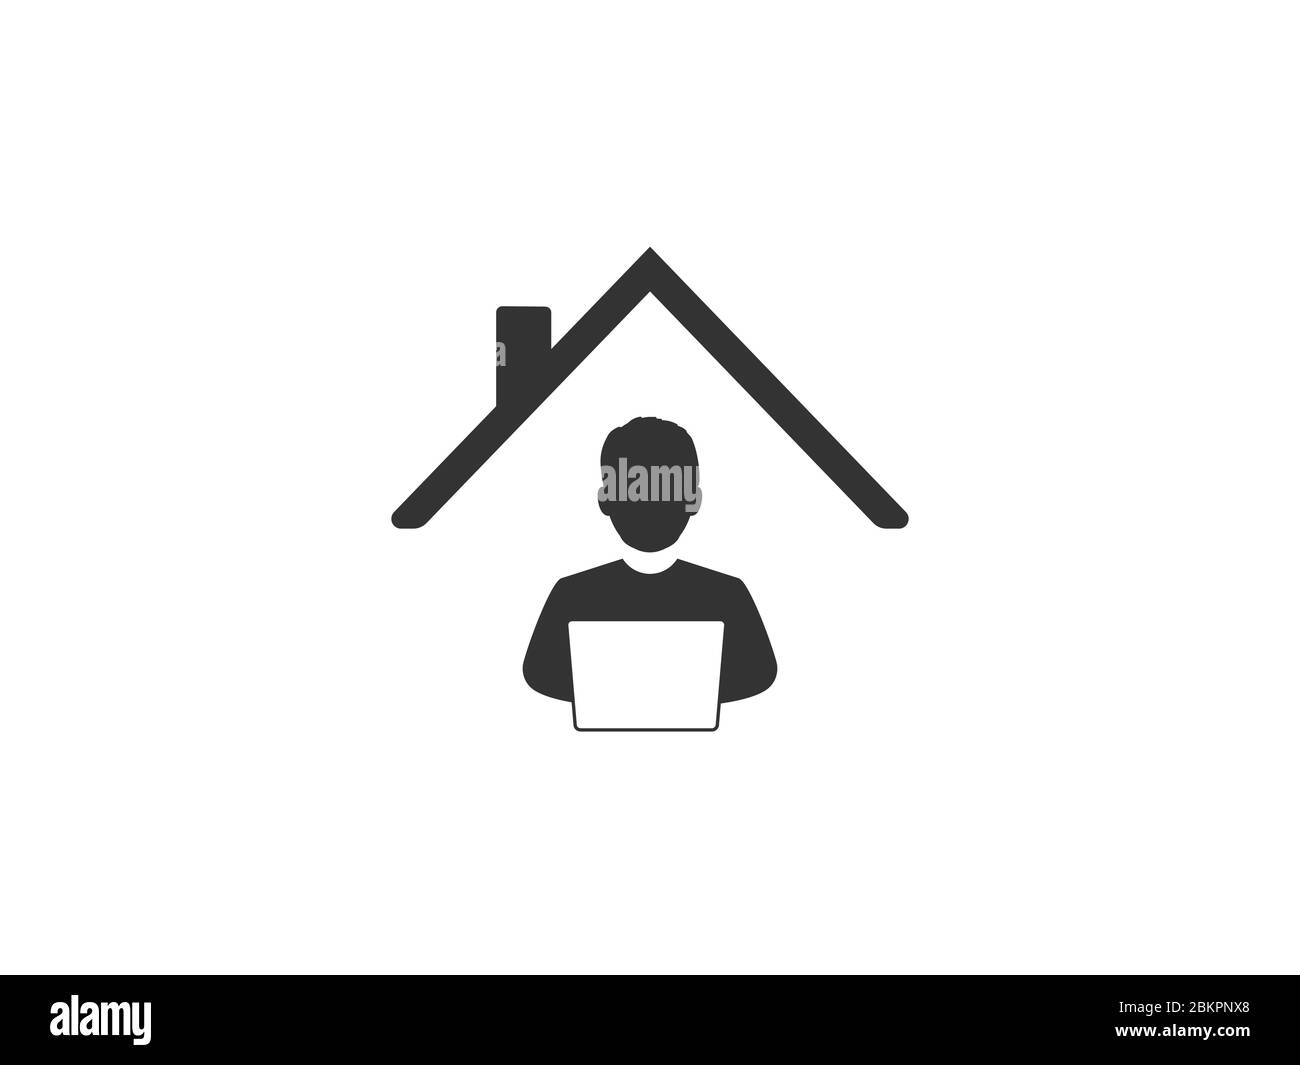 Work at home icon. Vector illustration, flat design. Stock Vector